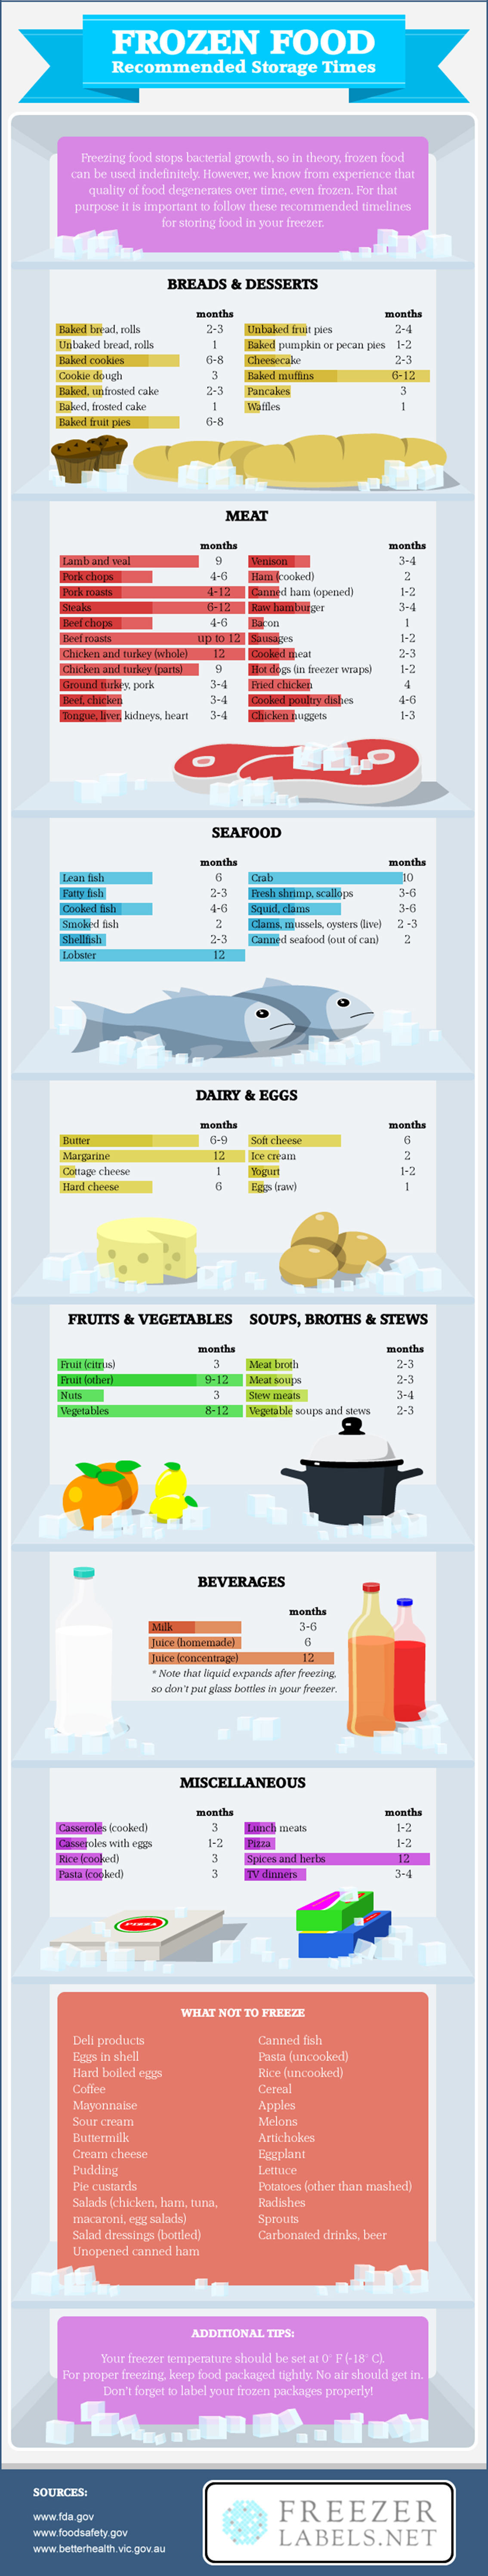 Refrigerated Food Storage Safety Guidelines Infographic